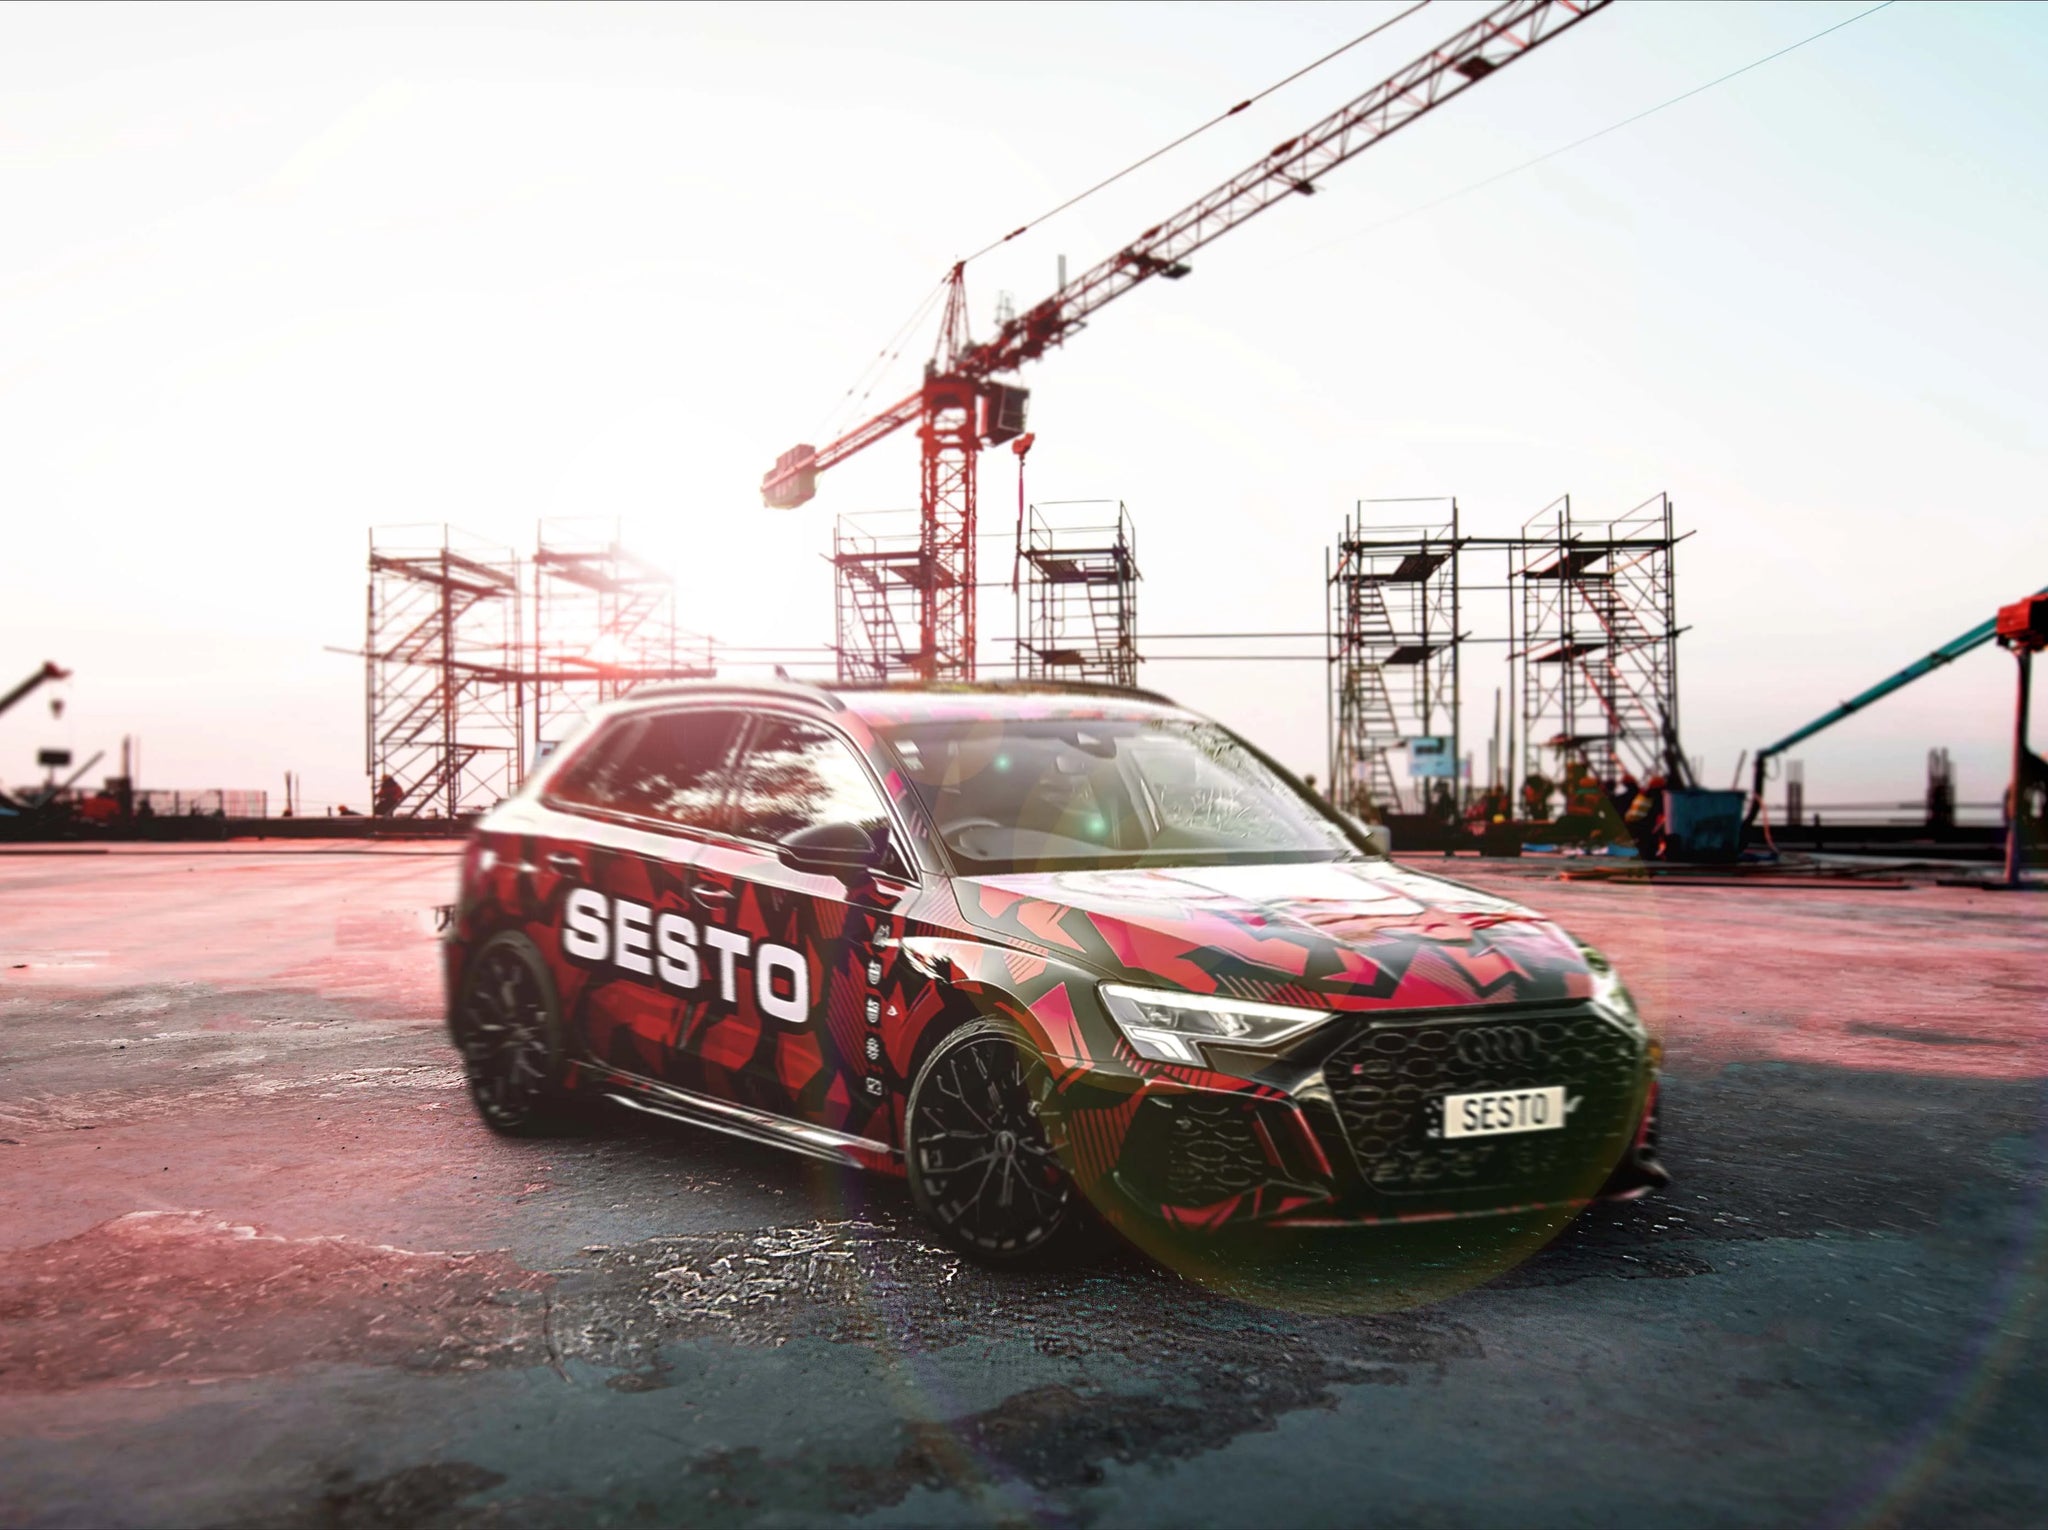 Audi RS3 with Sesto Fasteners graphics in a construction site. 